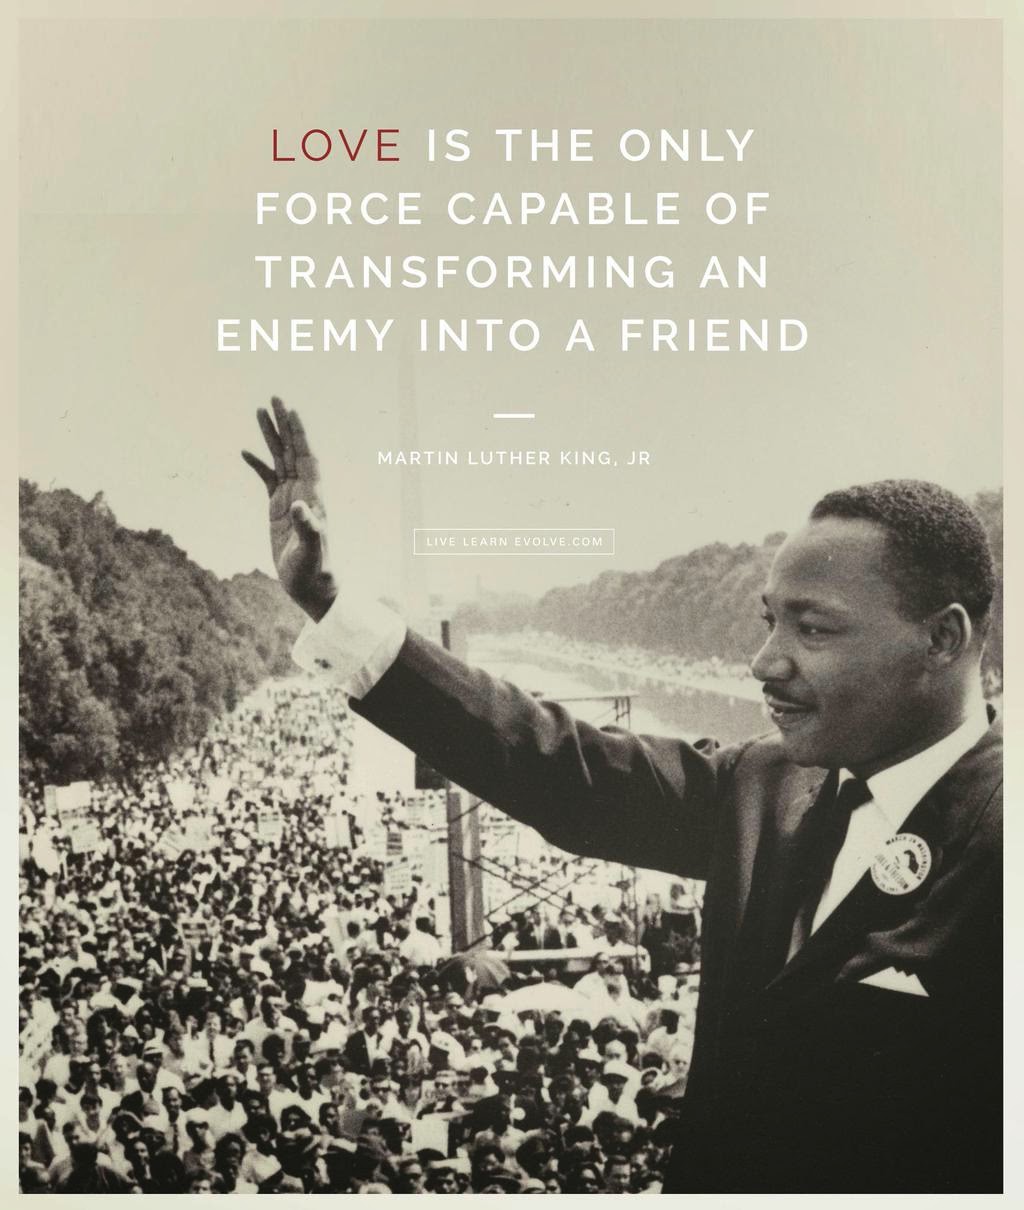 Love is the only force capable of transforming an enemy into a friend - Martin Luther King Jr.